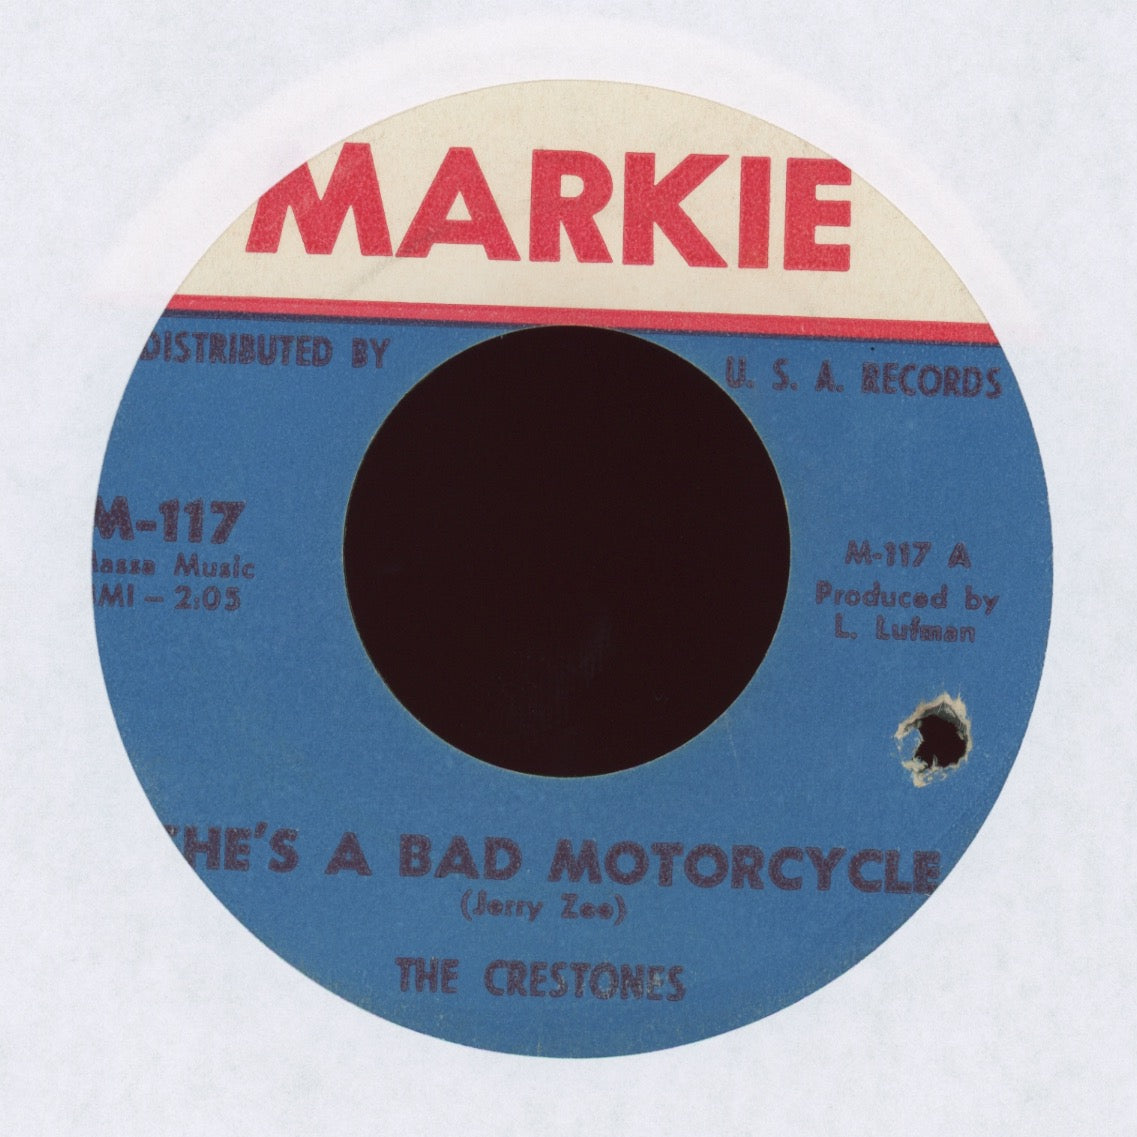 The Crestones - She's A Bad Motorcycle on Markie